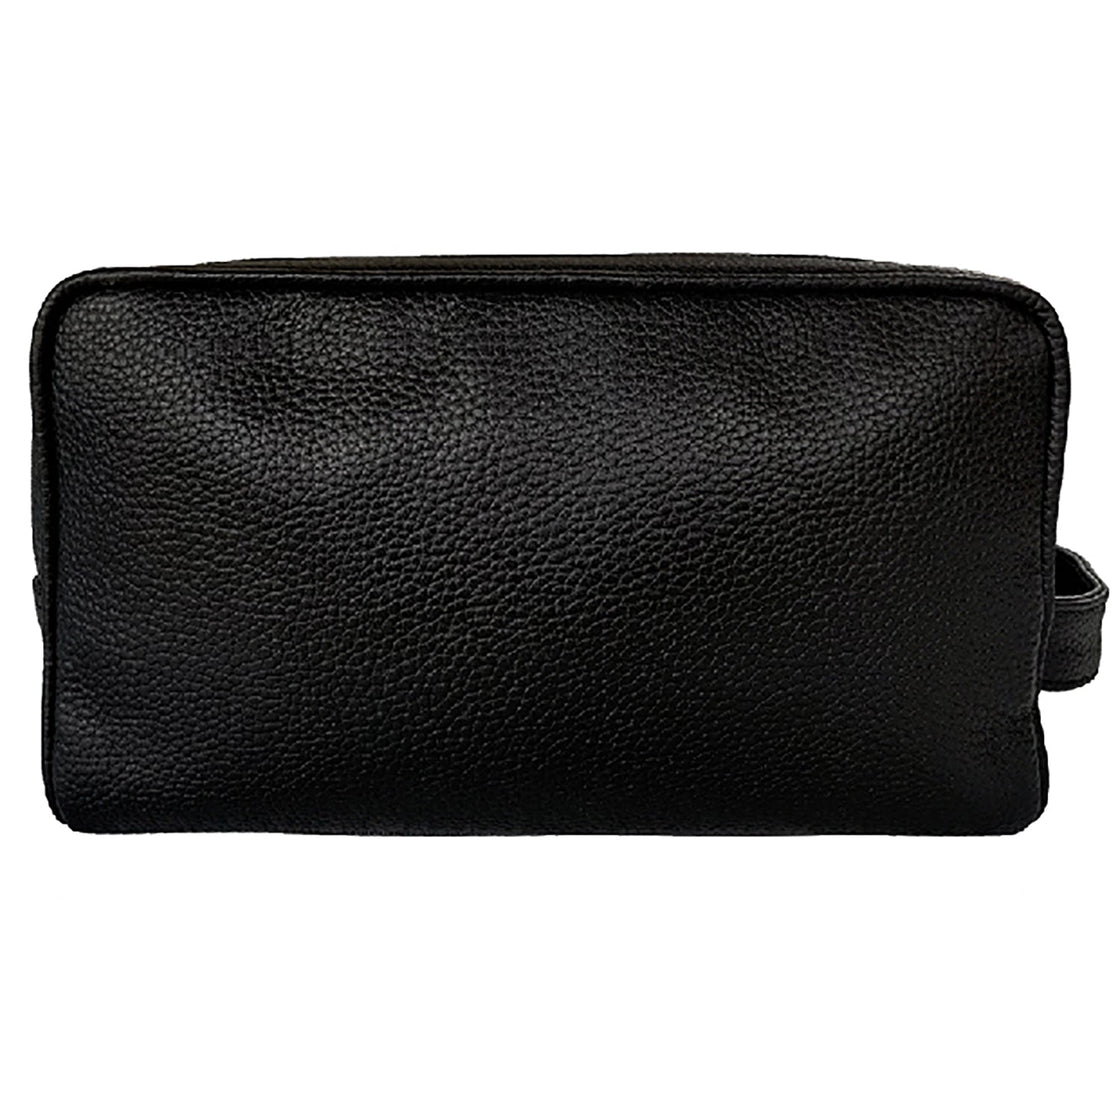 Johnny Leather Travel Toiletry Bag (Black)